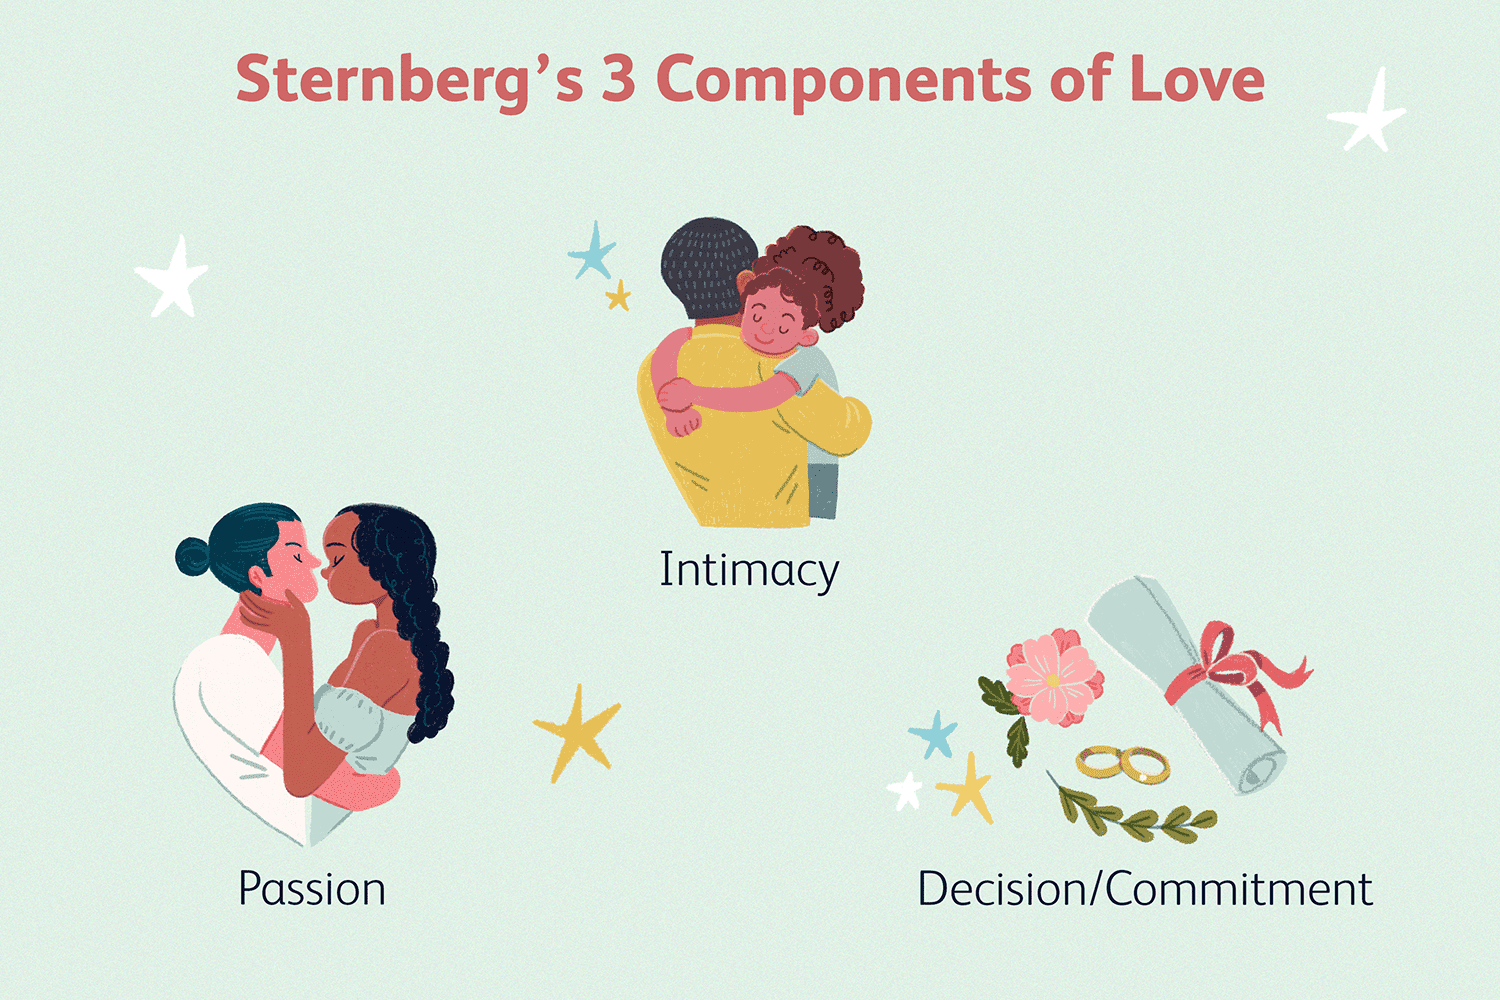 Sternberg’s Triangular Theory and the 7 Types of Love